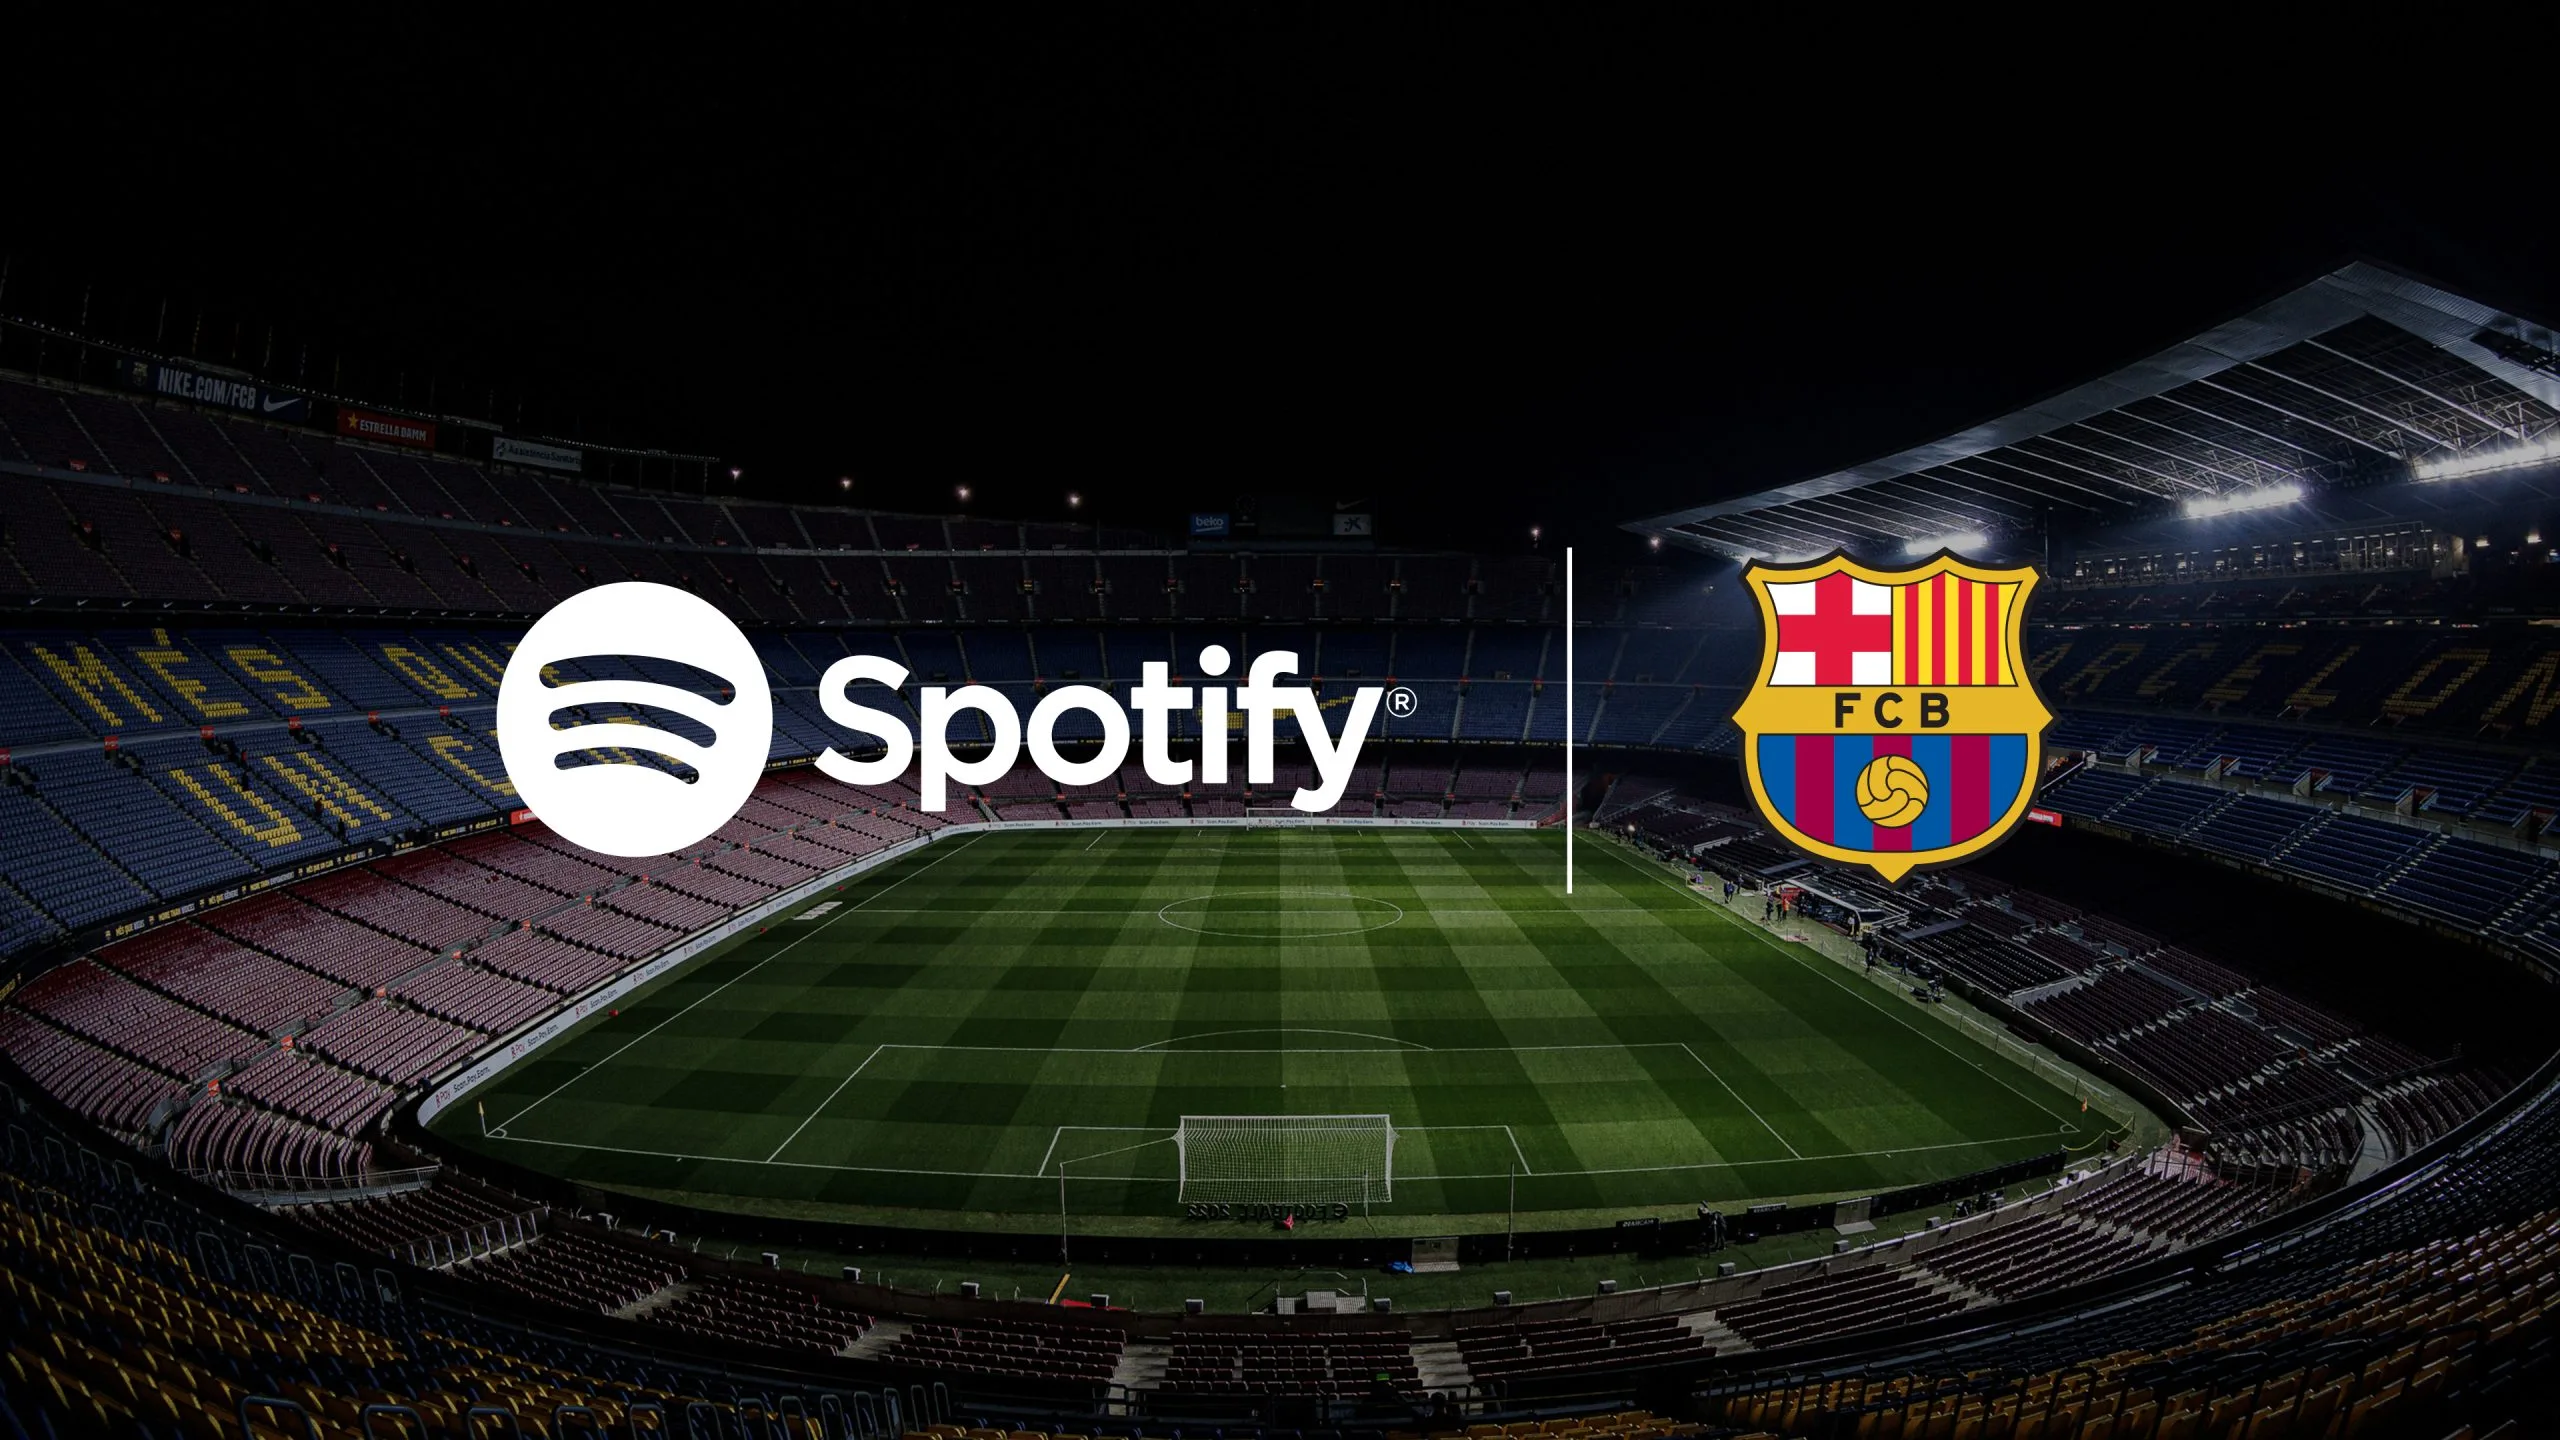 Spotify Camp Nou Awards: Celebrating the Farewell and Legacy of an Iconic Stadium